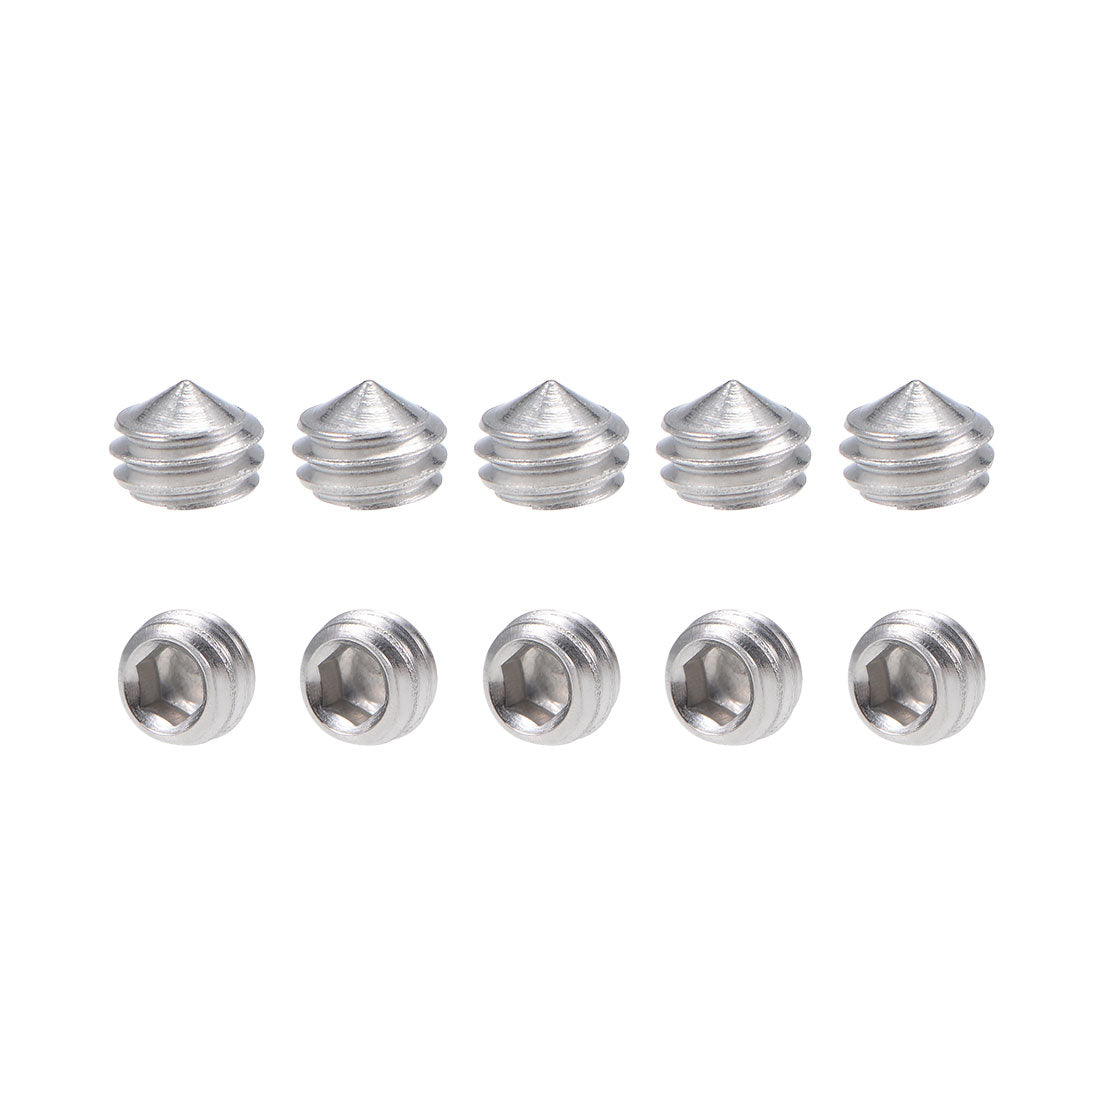 uxcell Uxcell 50Pcs M4x3mm Internal Hex Socket Set Grub Screws Cone Point 304 Stainless Steel Screw